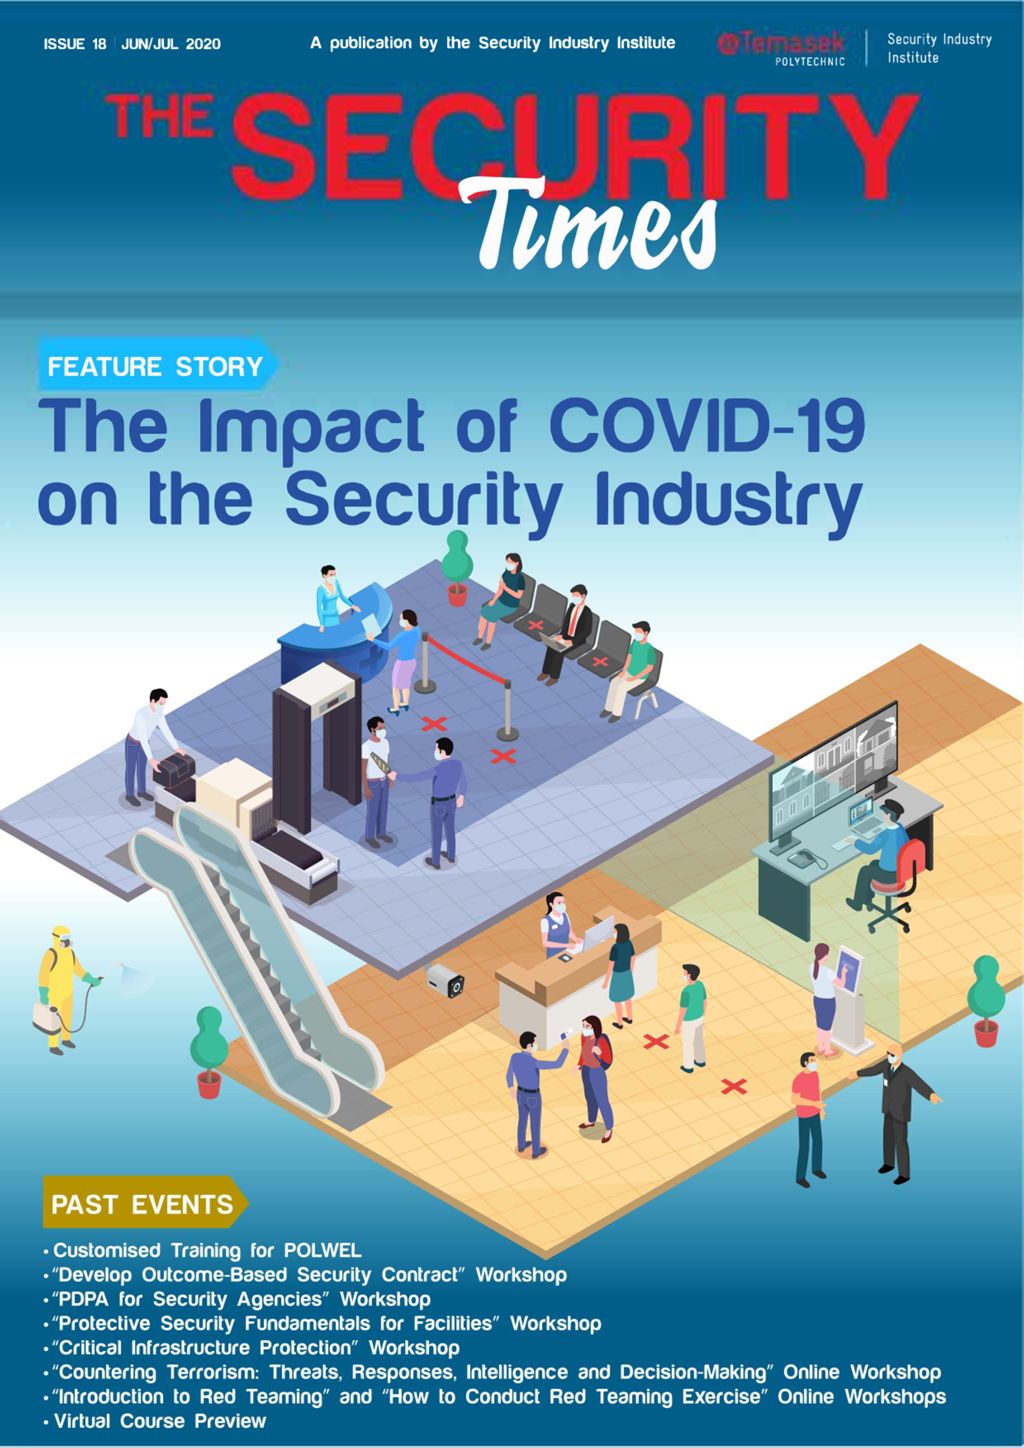 The Security Times : a publication by the Security Industry Institute. Jun. / Jul. 2020. Issue 18